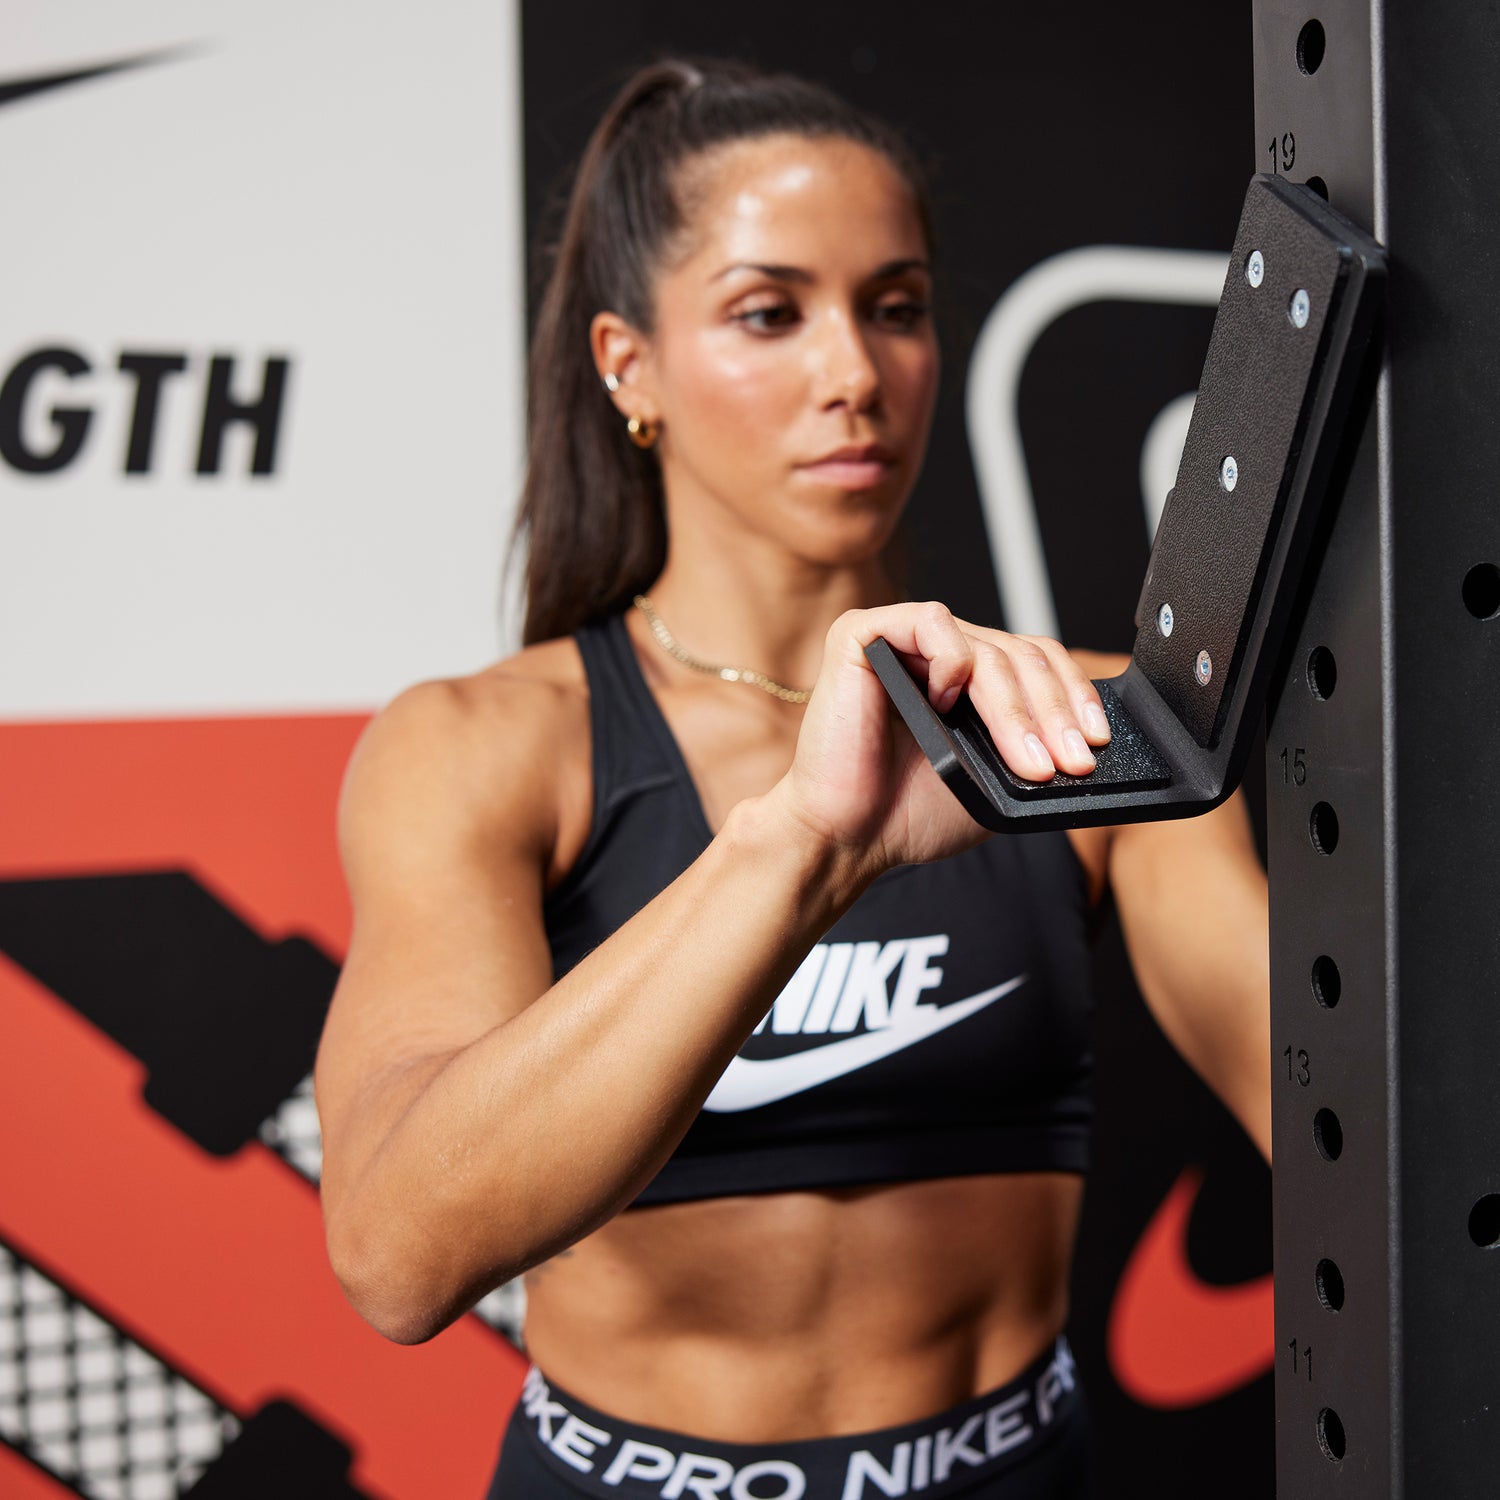 Athlete attaching the J-cup to the Nike Squat Rack